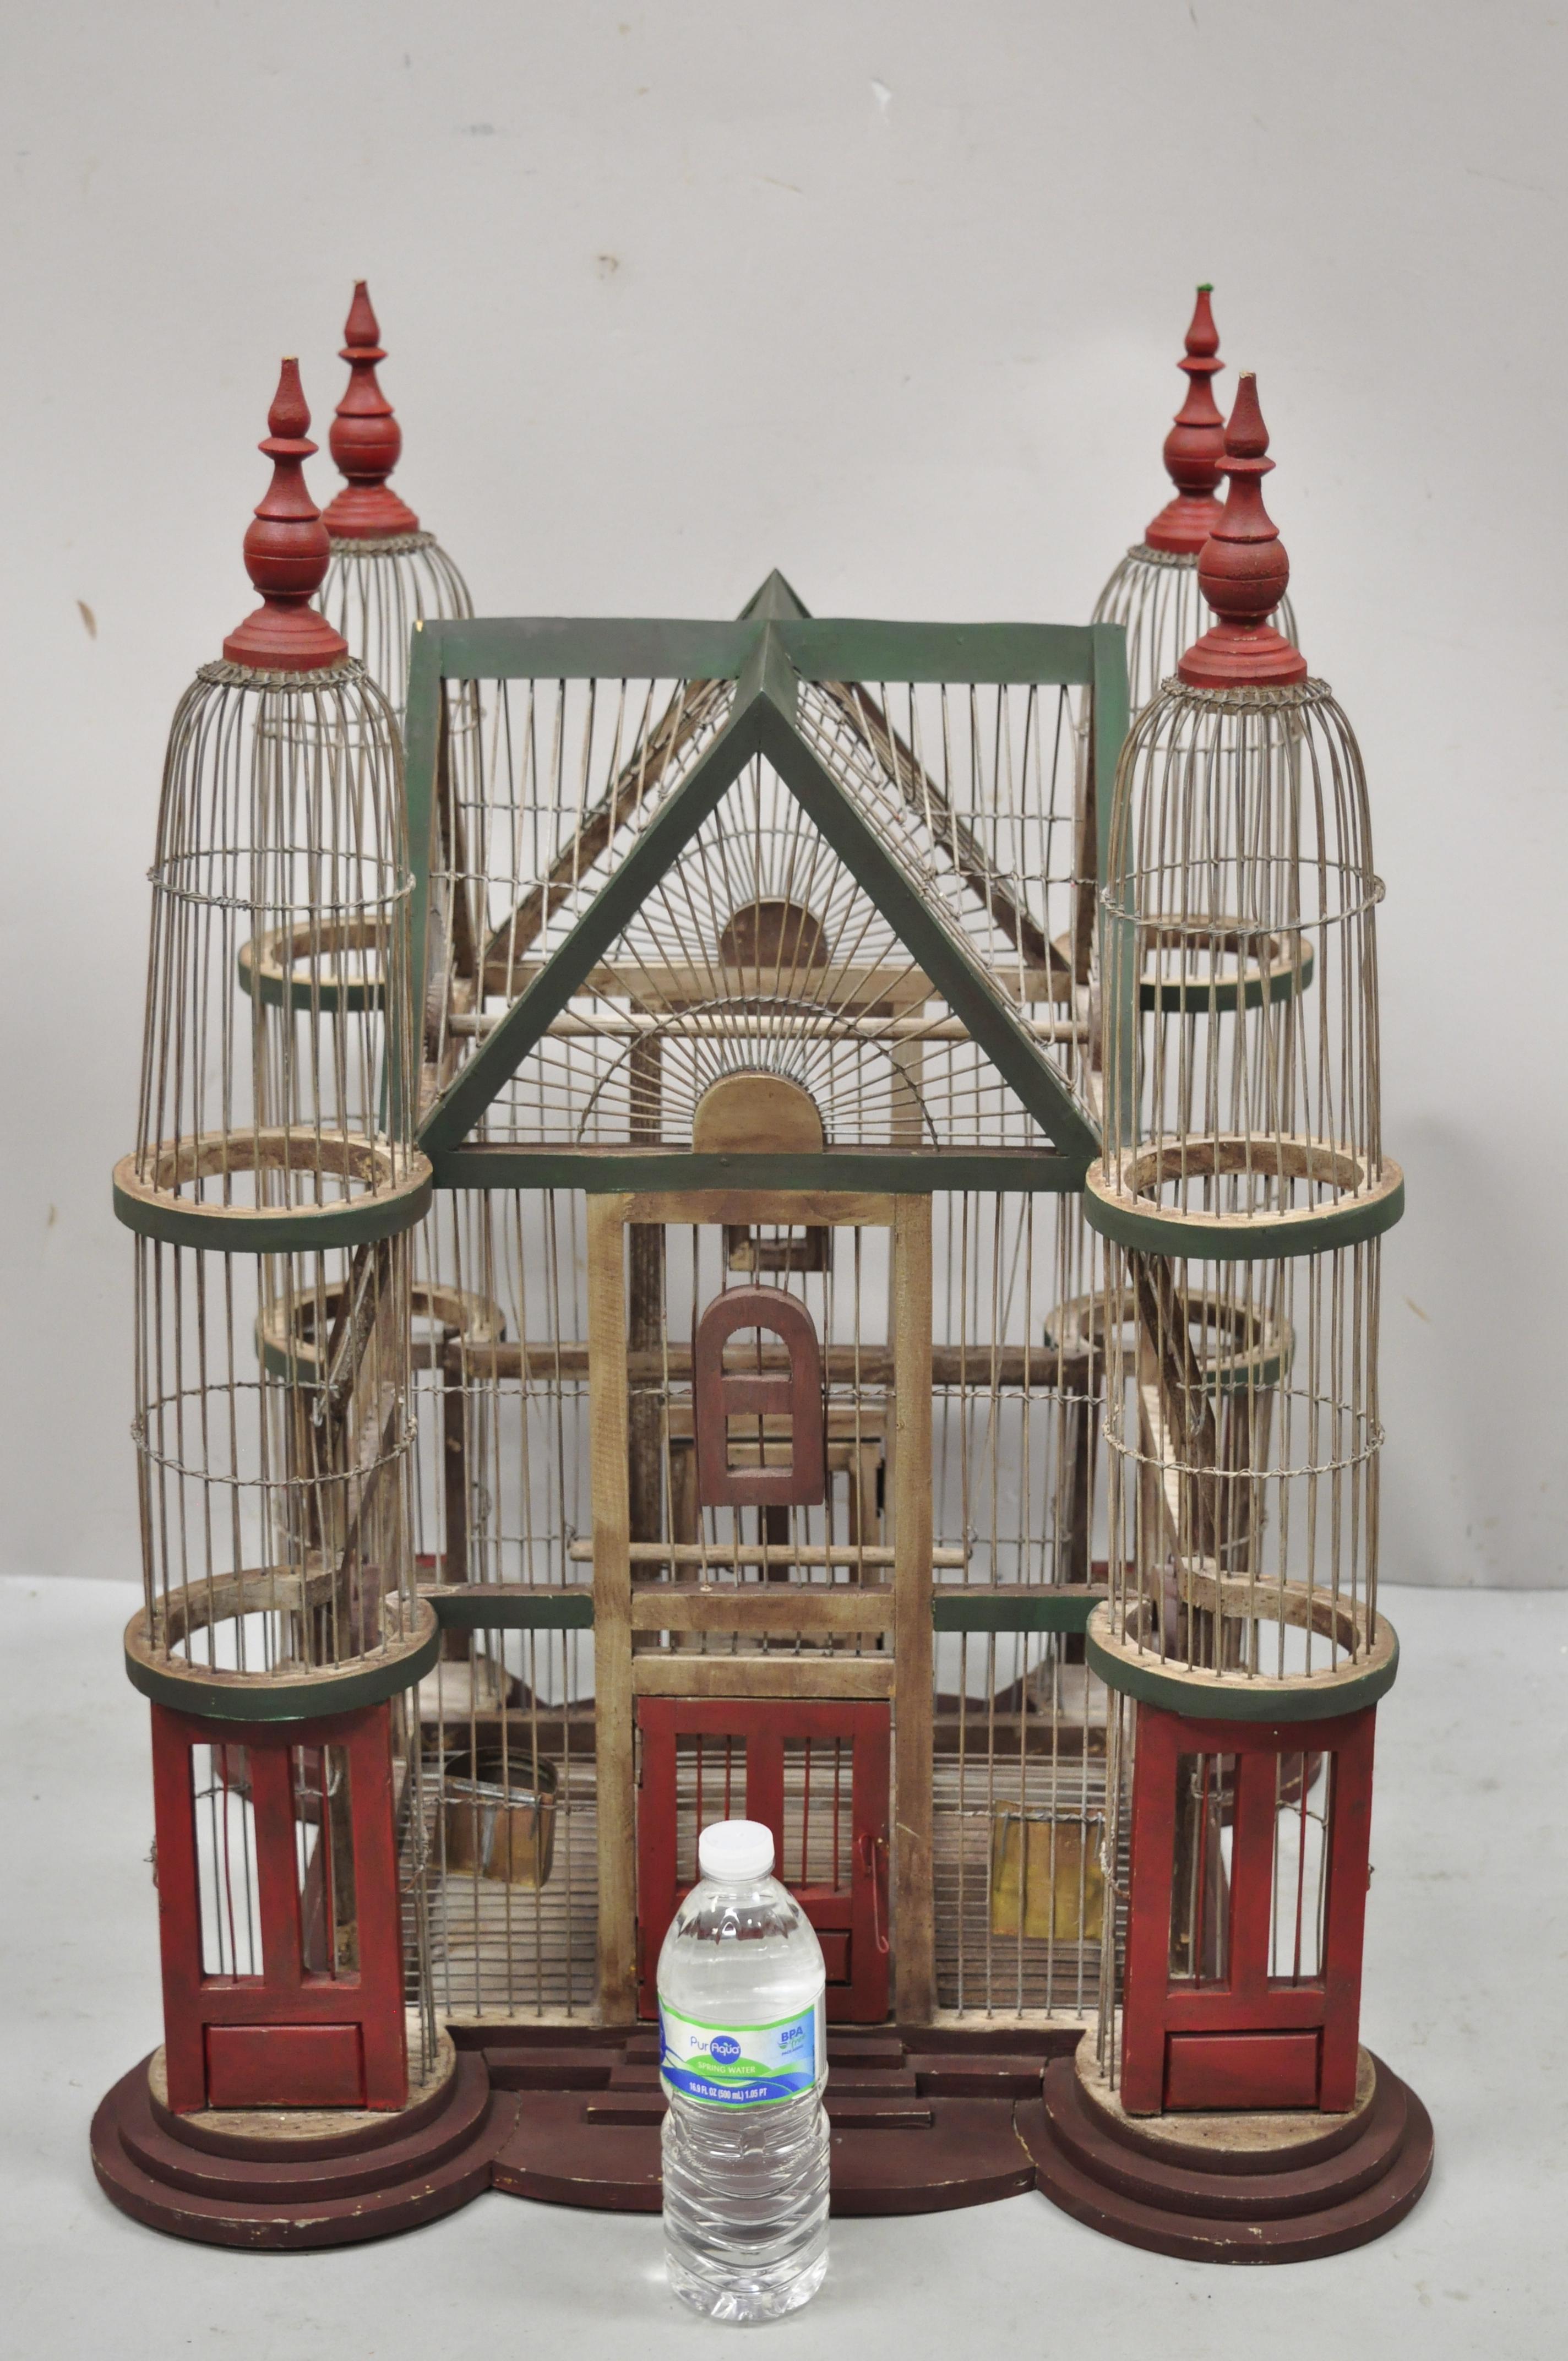 Vintage French Victorian large wooden antique painted cathedral domed birdcage. Item features entry from both sides, green and red painted finish, carved finials, bird swing on the inside, solid wood frame, very nice vintage item, quality